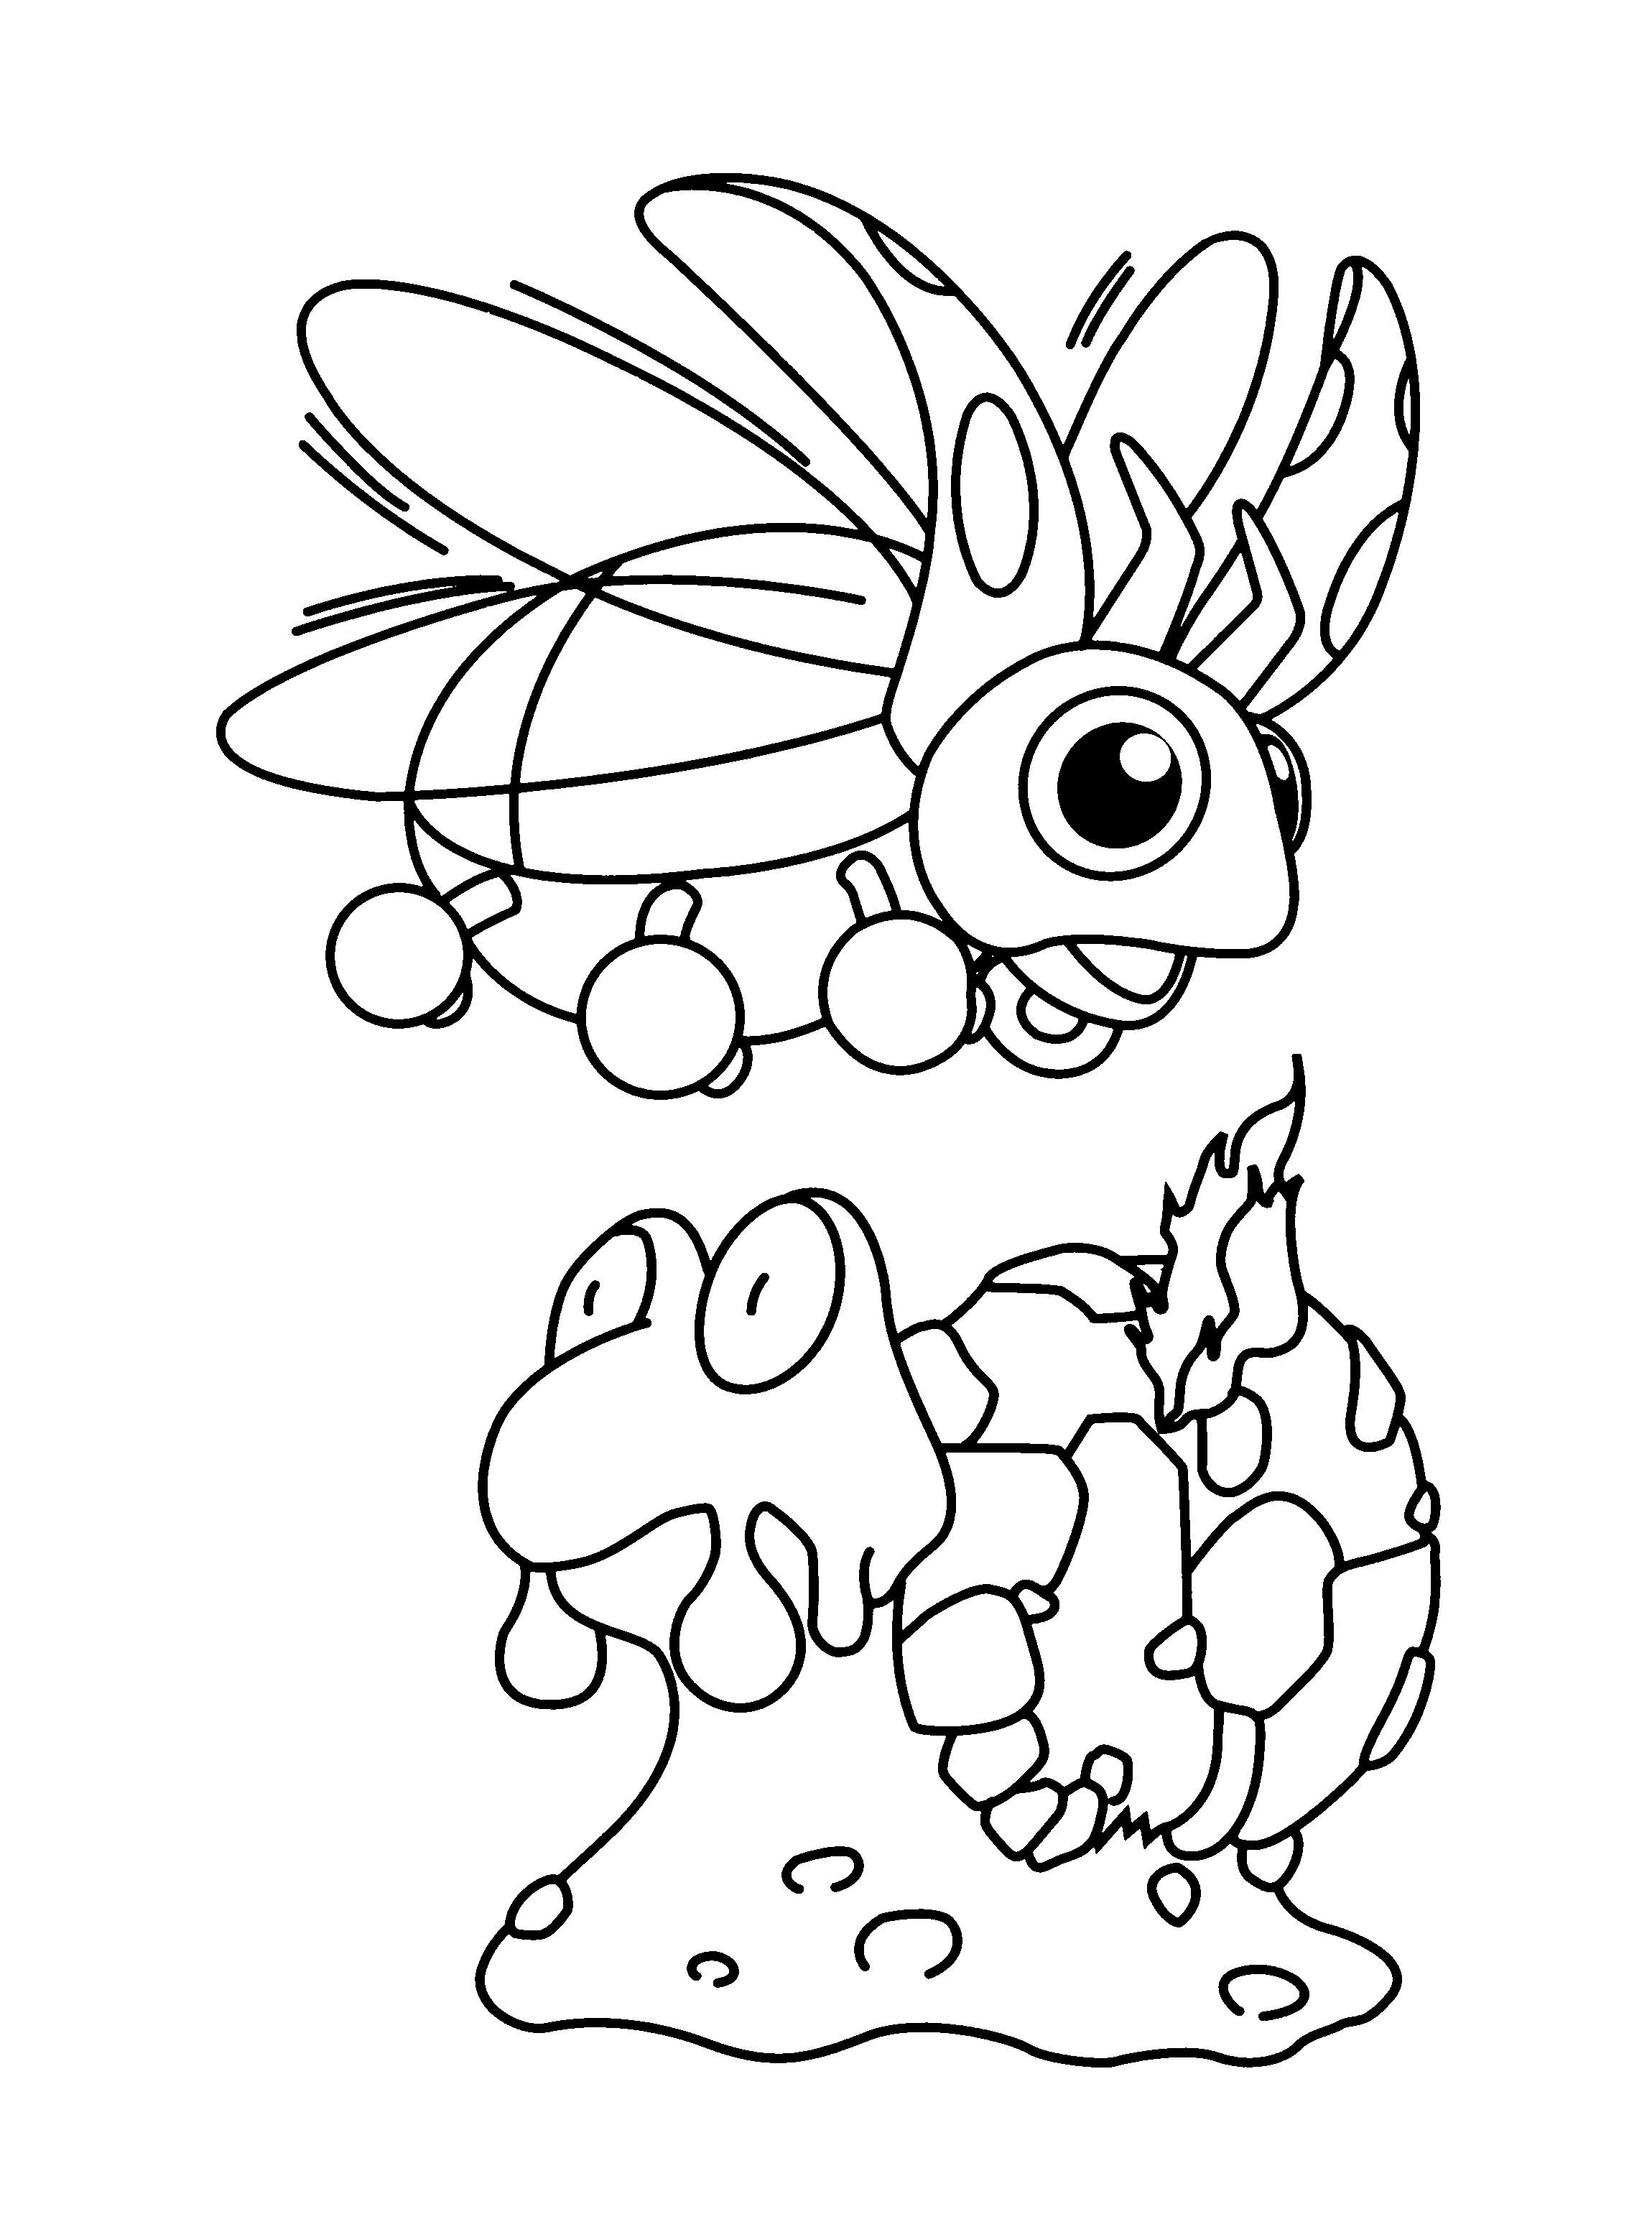 animated-coloring-pages-pokemon-image-0435